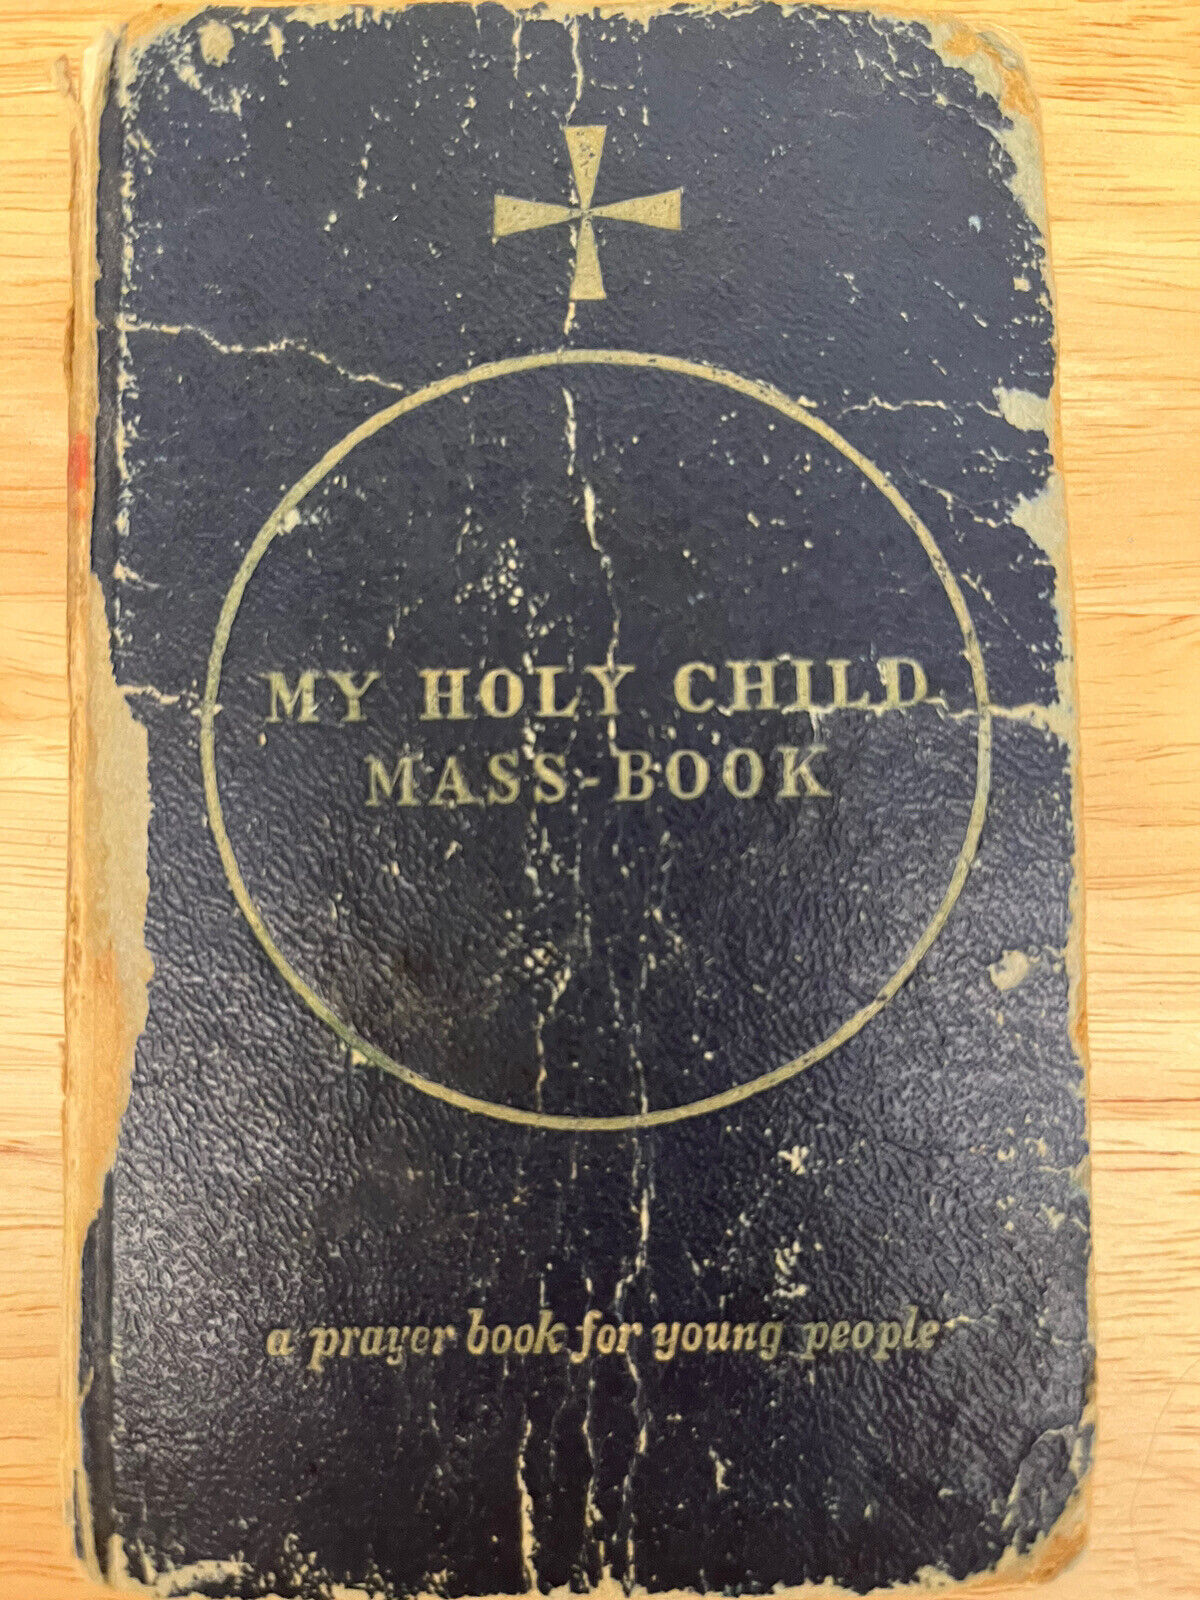 Vtg Catholic Mass Book 1959 My Holy Child Prayer Book for Young People READ